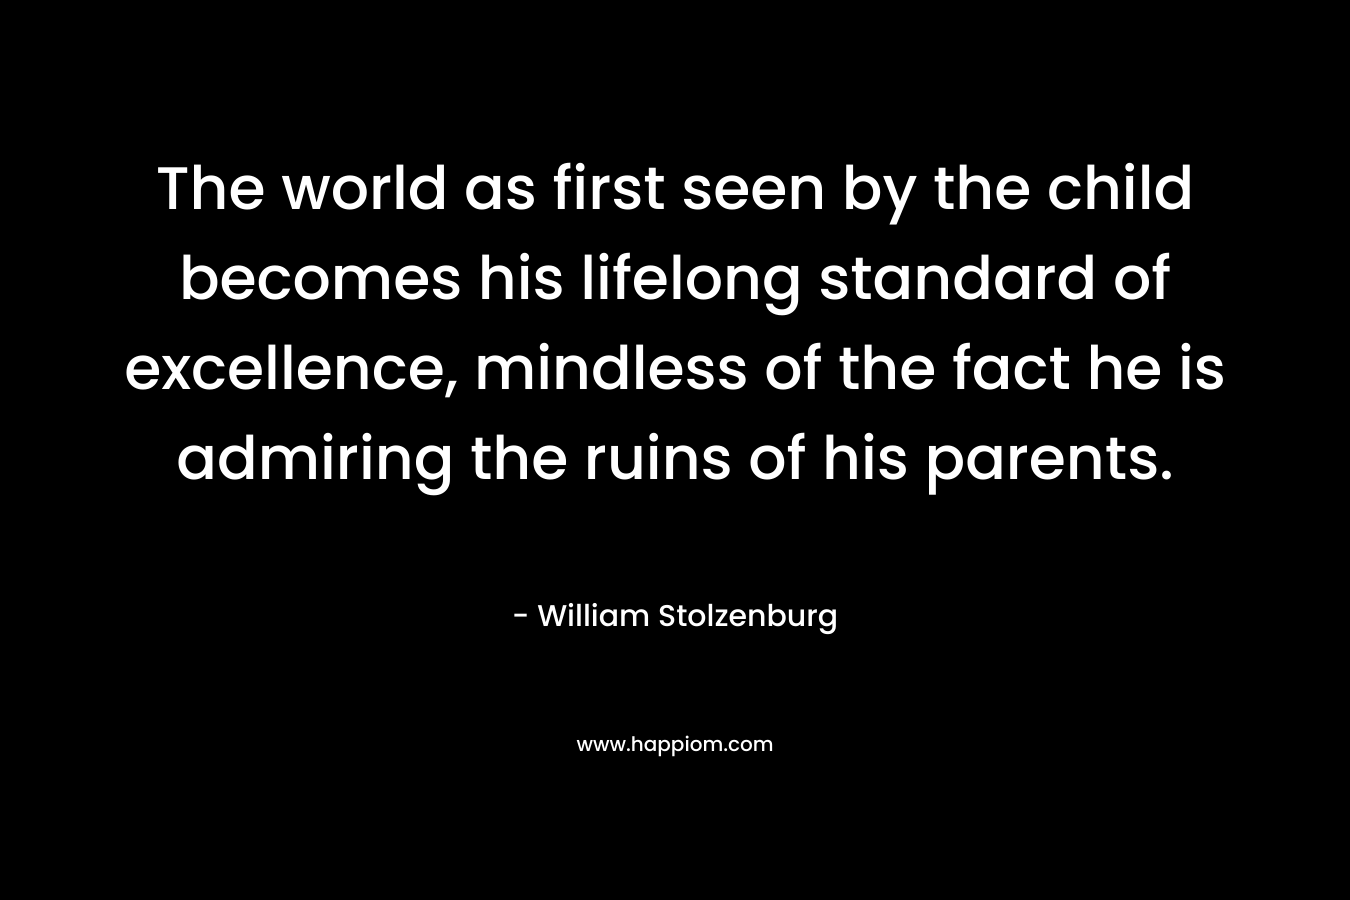 The world as first seen by the child becomes his lifelong standard of excellence, mindless of the fact he is admiring the ruins of his parents.